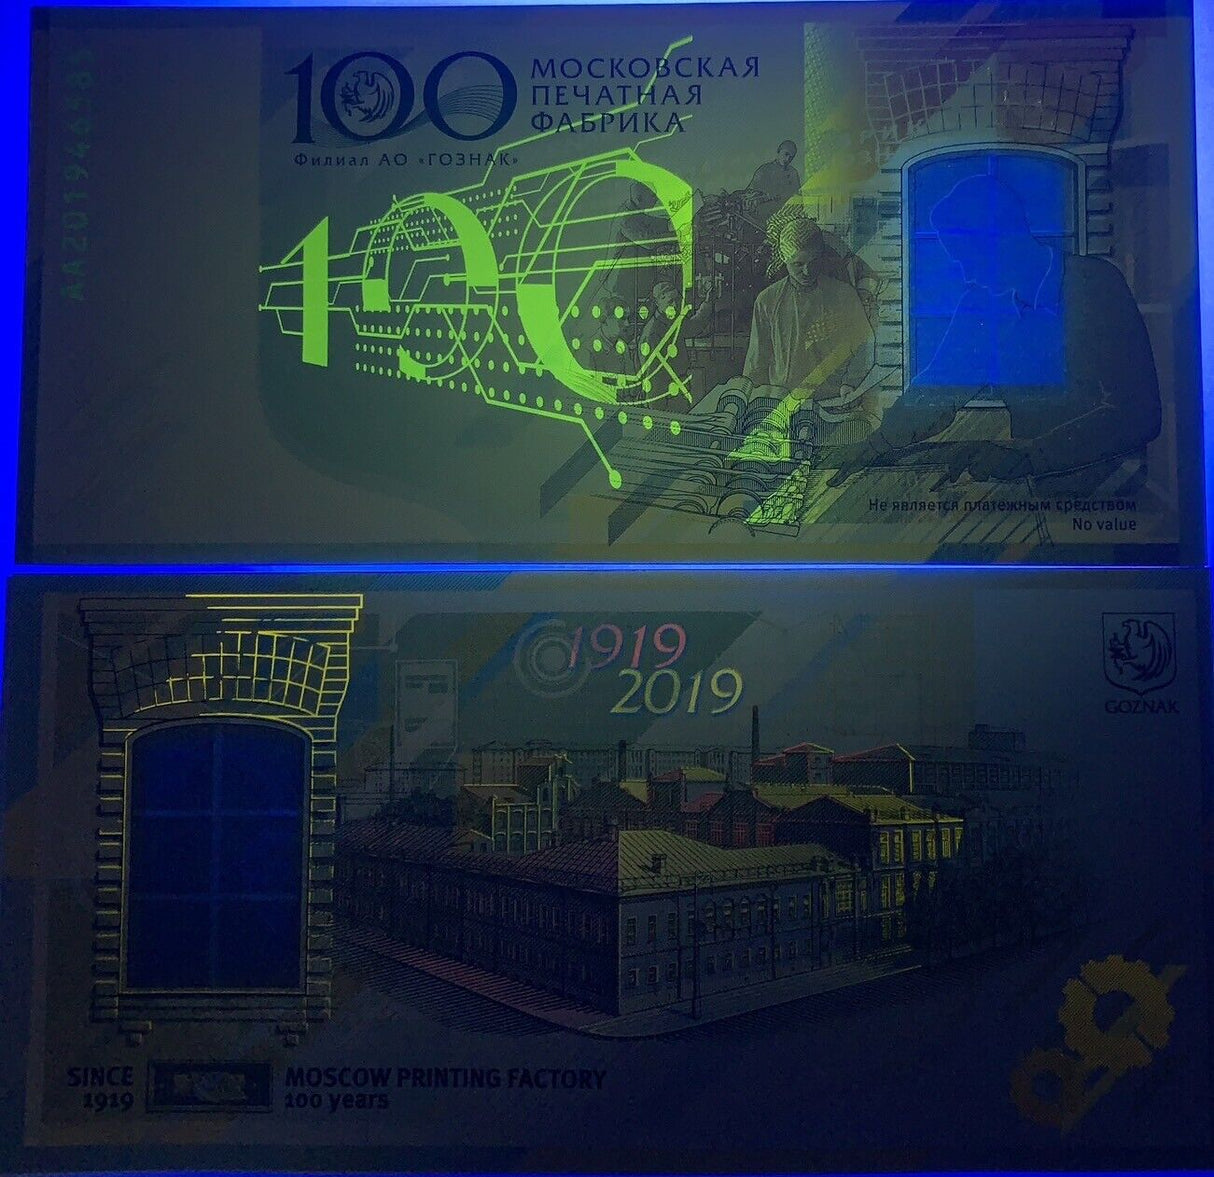 Russia GOZNAK Test Note Moscow Printing Factory 100th 1919-2019 Specimen